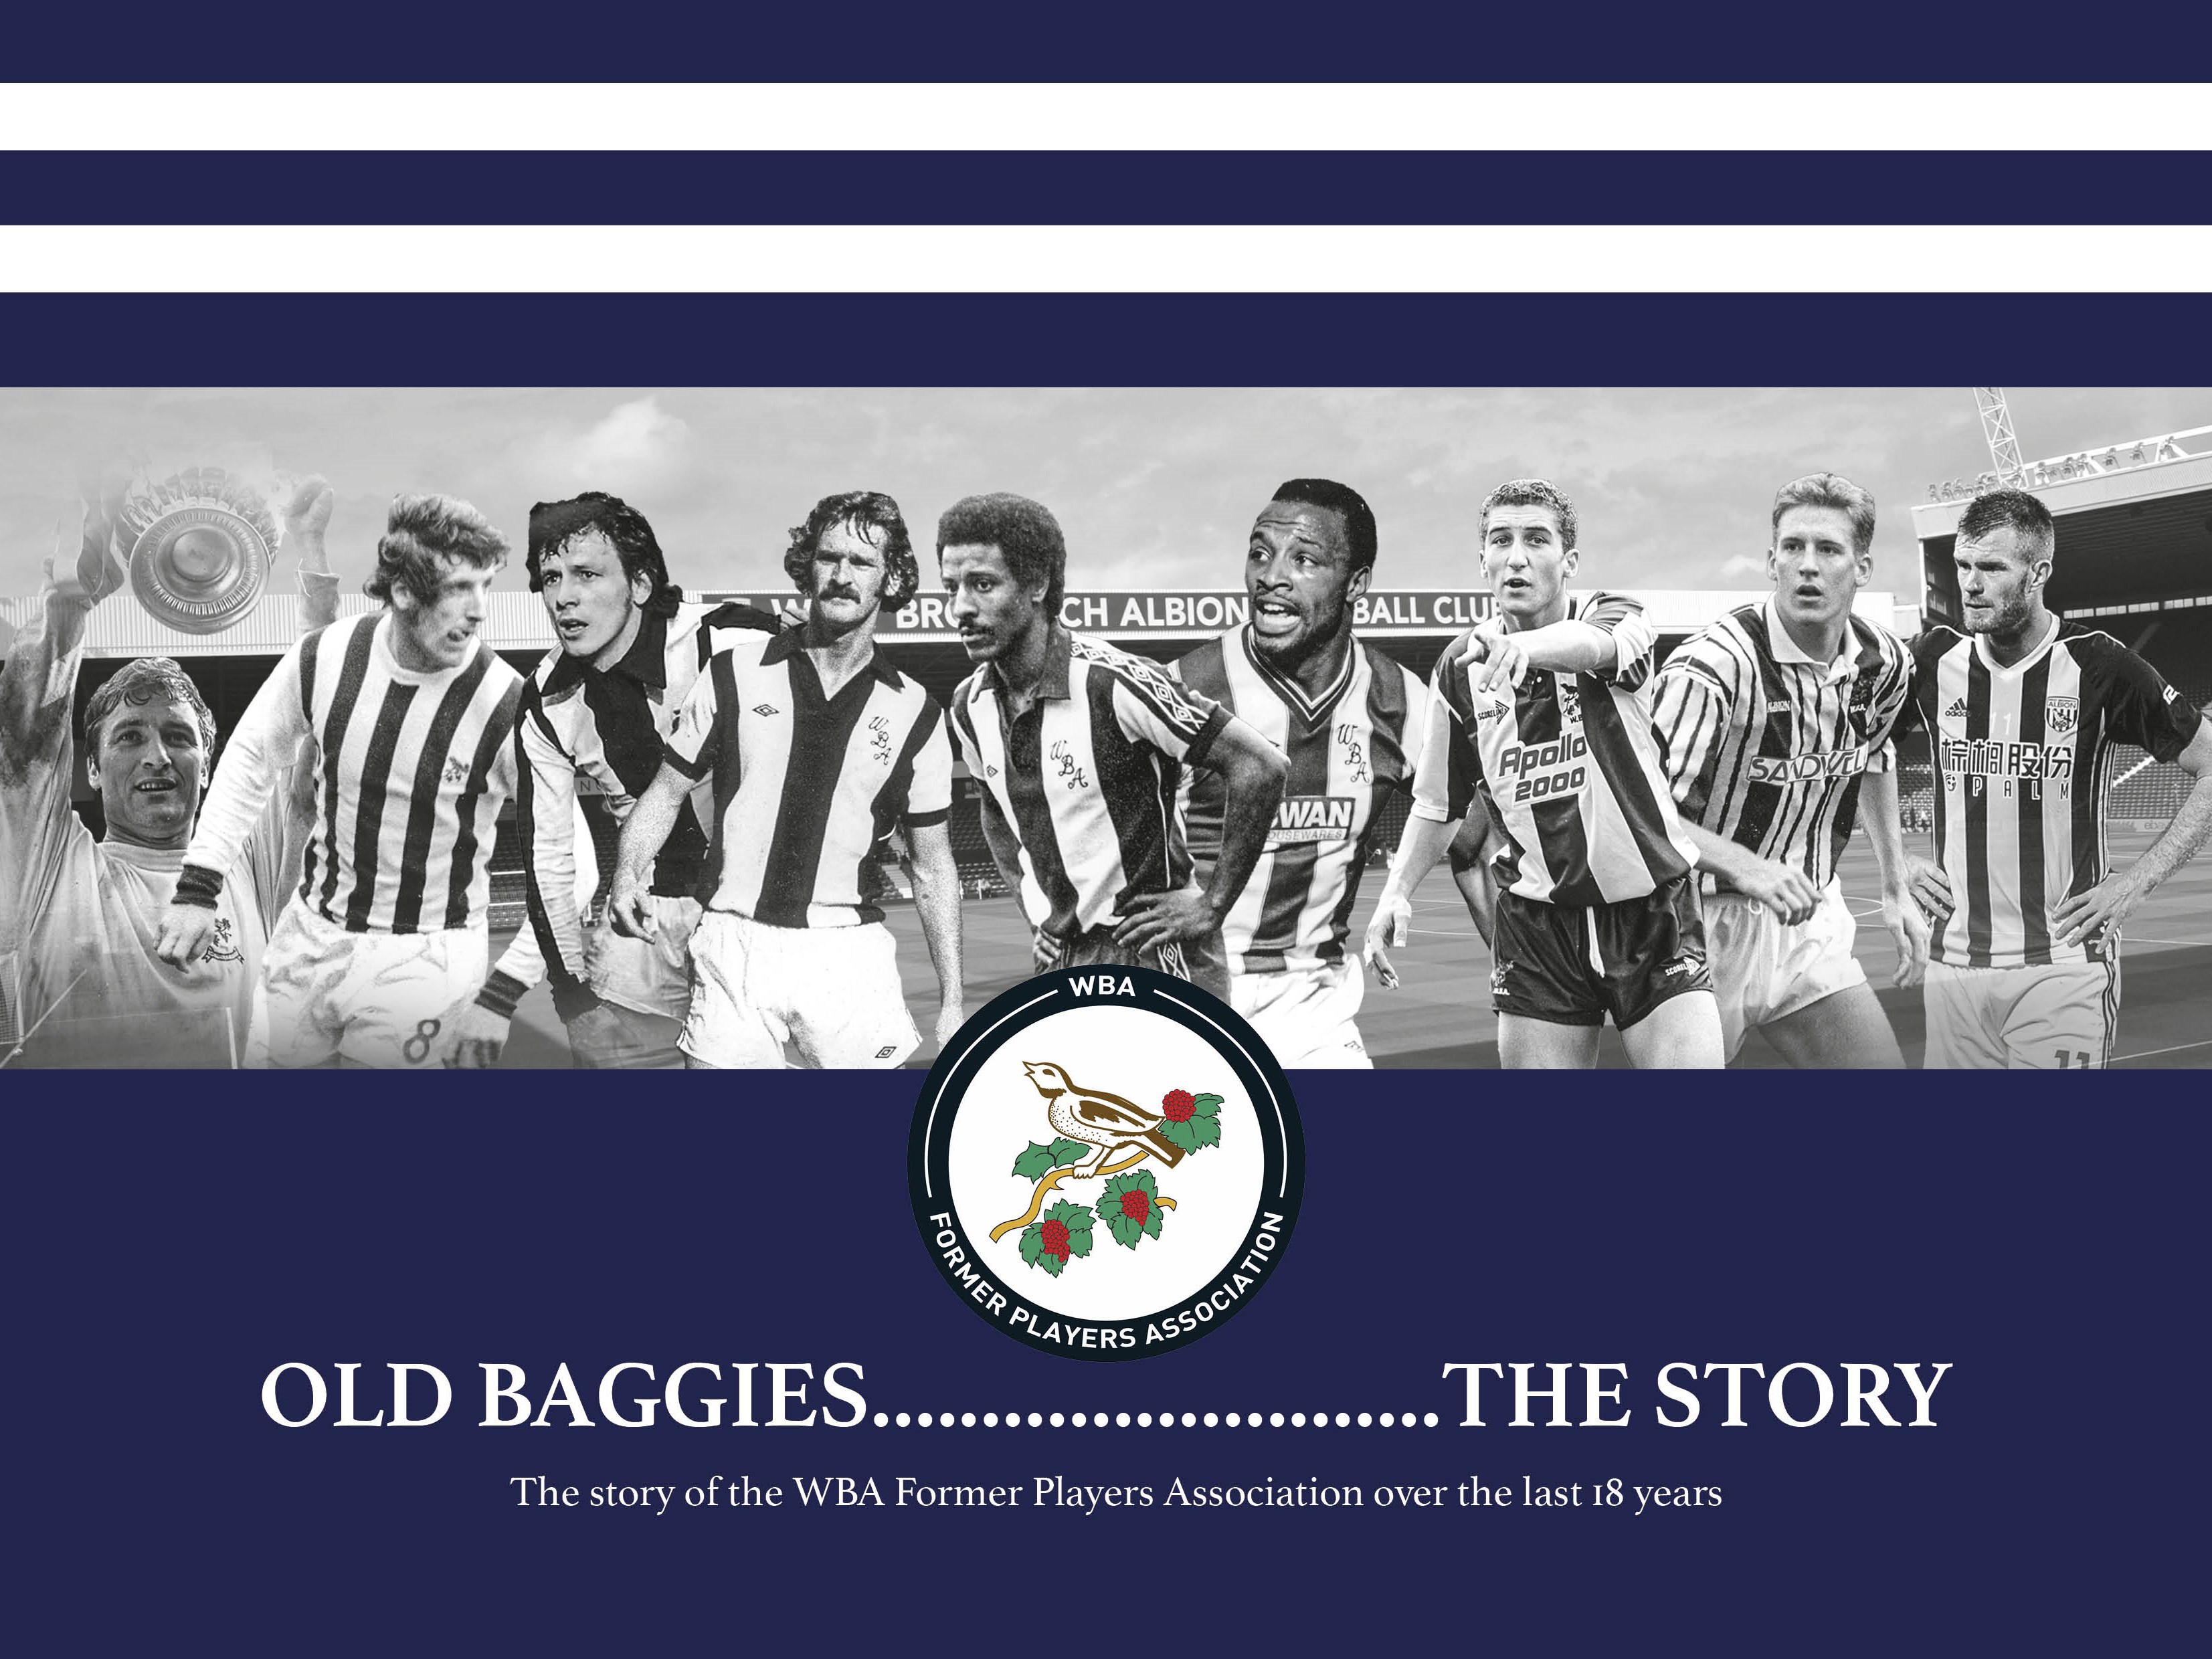 Former Players' Association 'Old Baggies'